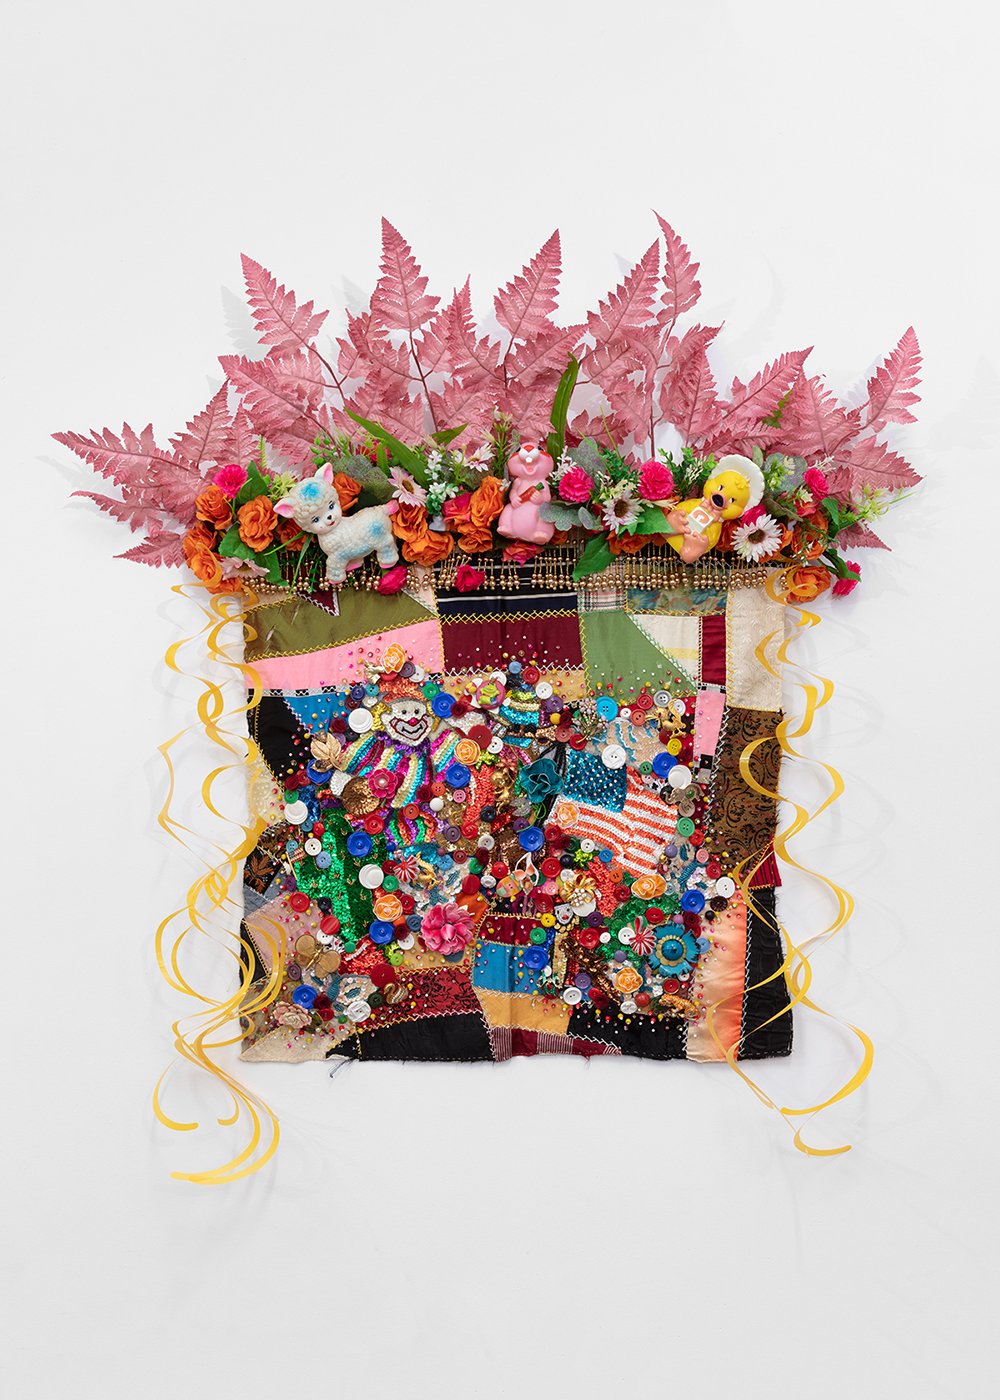   Shroud #9 (study) , 2022, Found ‘Crazy’ quilt ca. 1900, trim, fabric flowers, streamers, toys, costume jewelry, buttons, plastic flowers, beads, sequins, thread, fabric, pine, 39 x 36 x 7” 